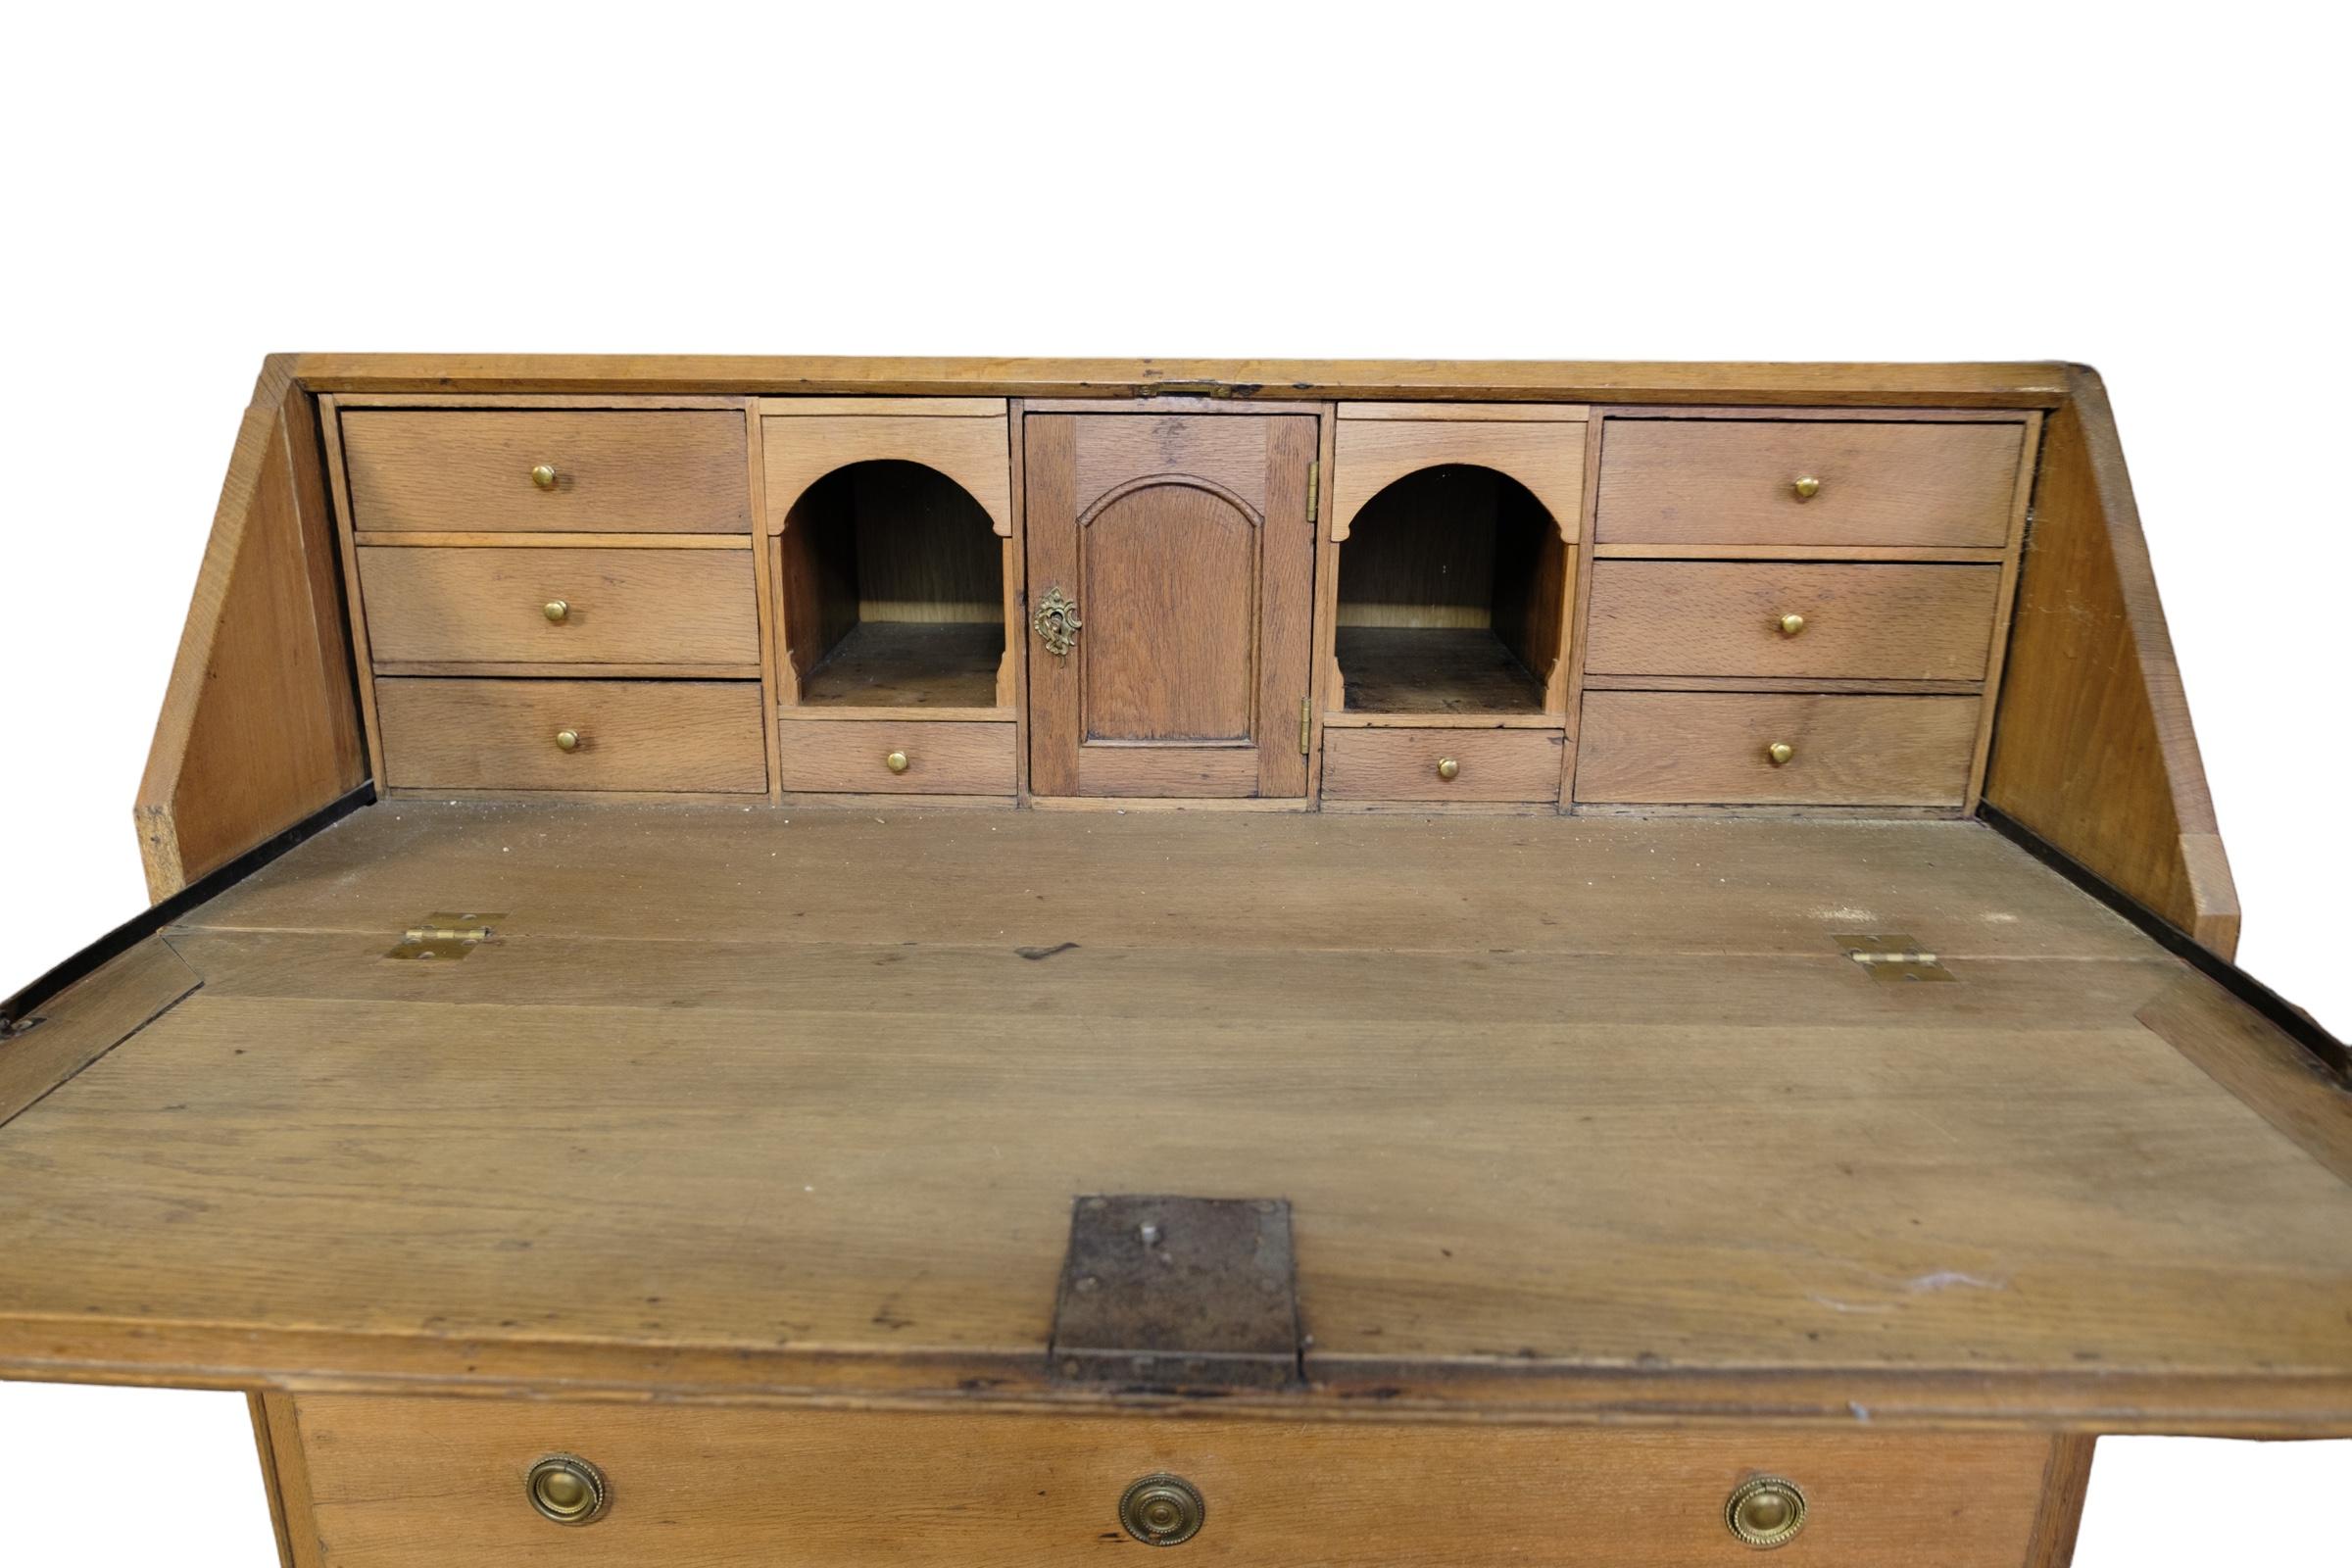 Louis Seize style chatol with 3 drawers made in oak from around 1780.
Measurements in cm: H:108 W:118 D:57